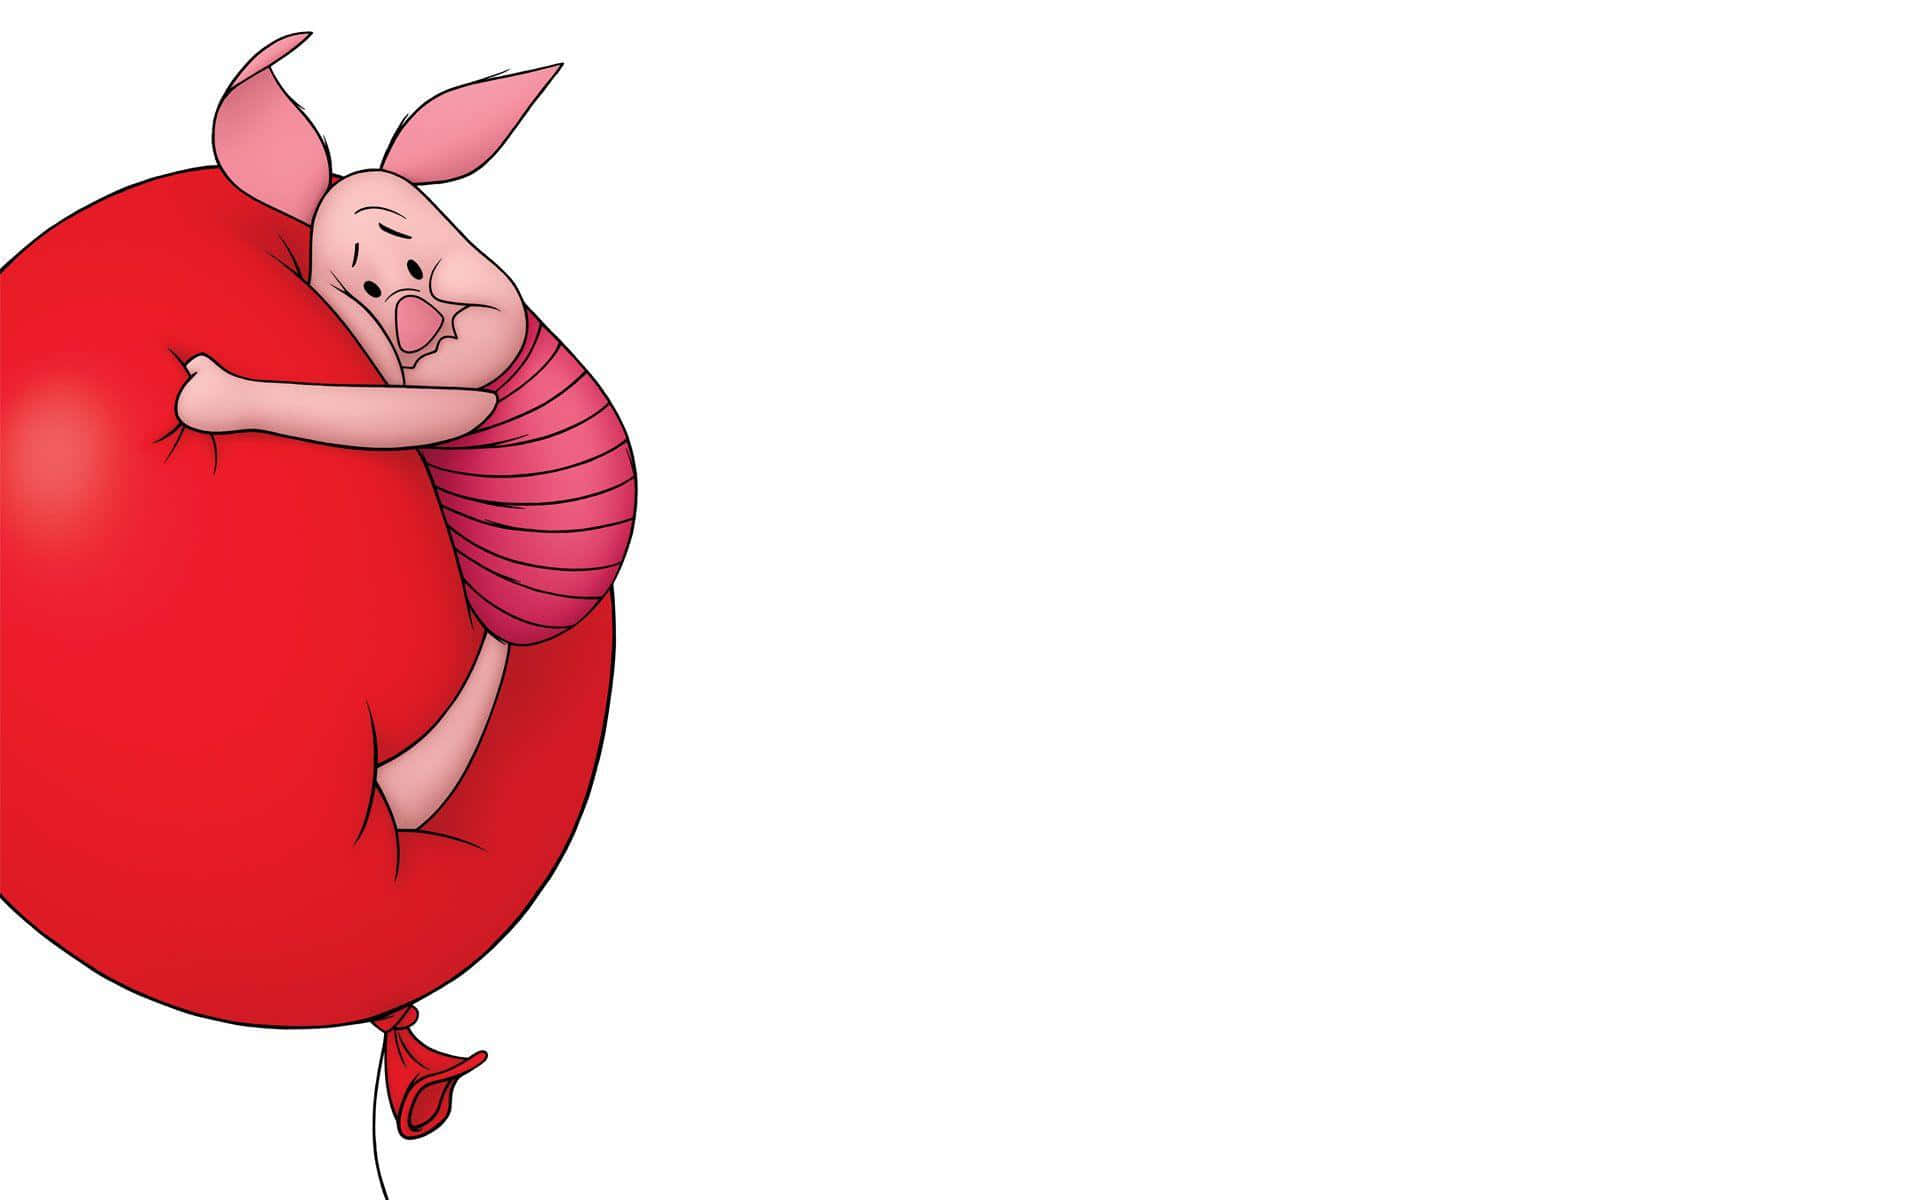 Piglet lives life to the fullest by indulging in life’s simple pleasures. Wallpaper